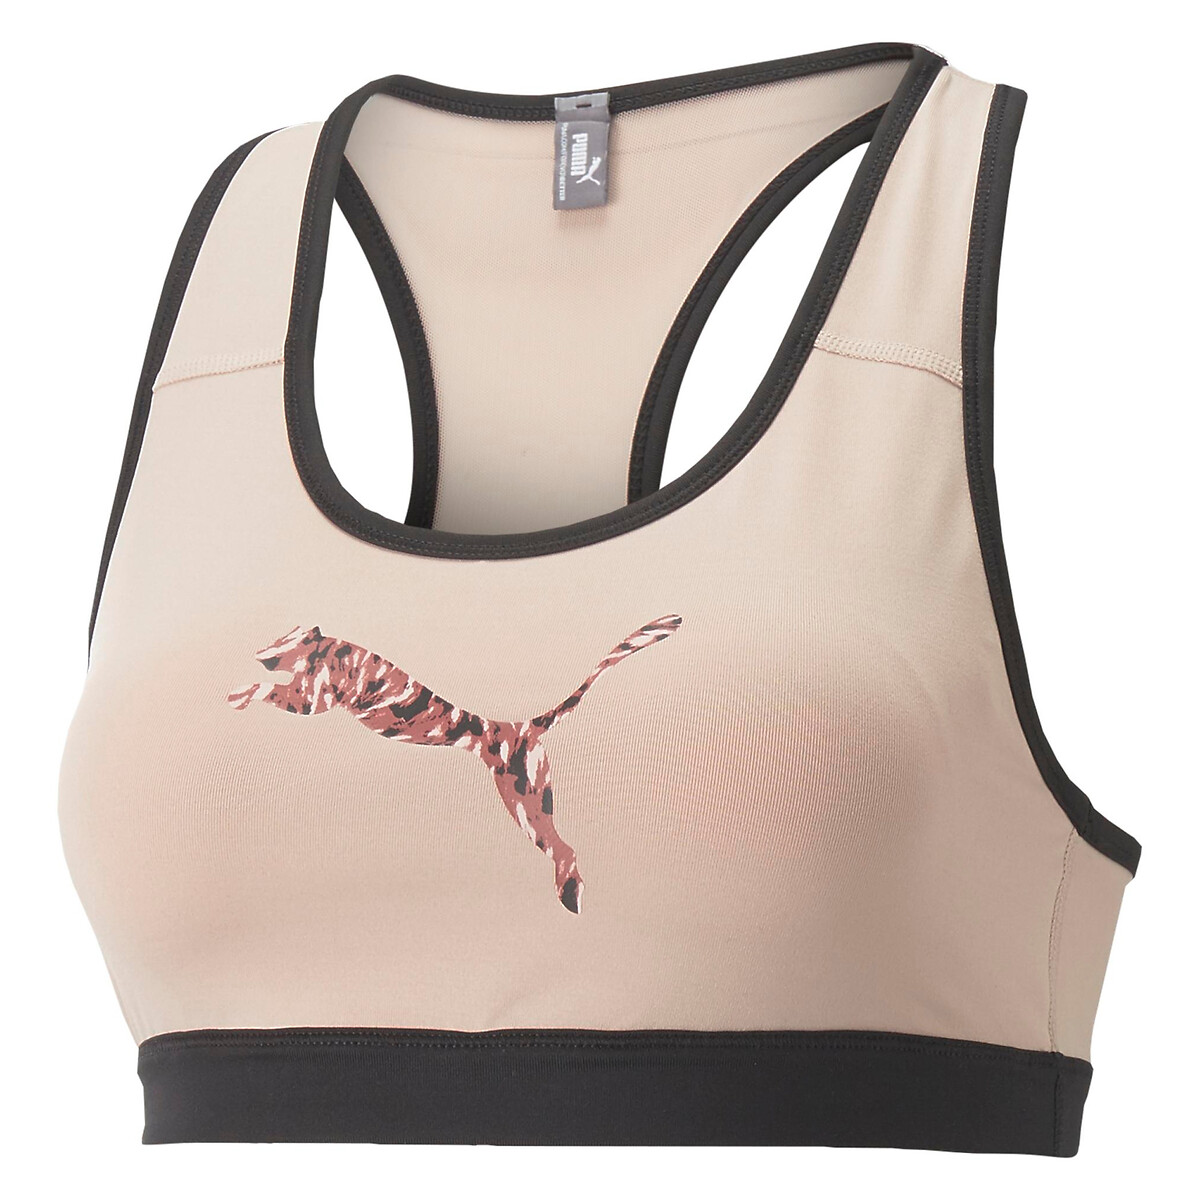 Recycled Sports Bra, Moderate Support